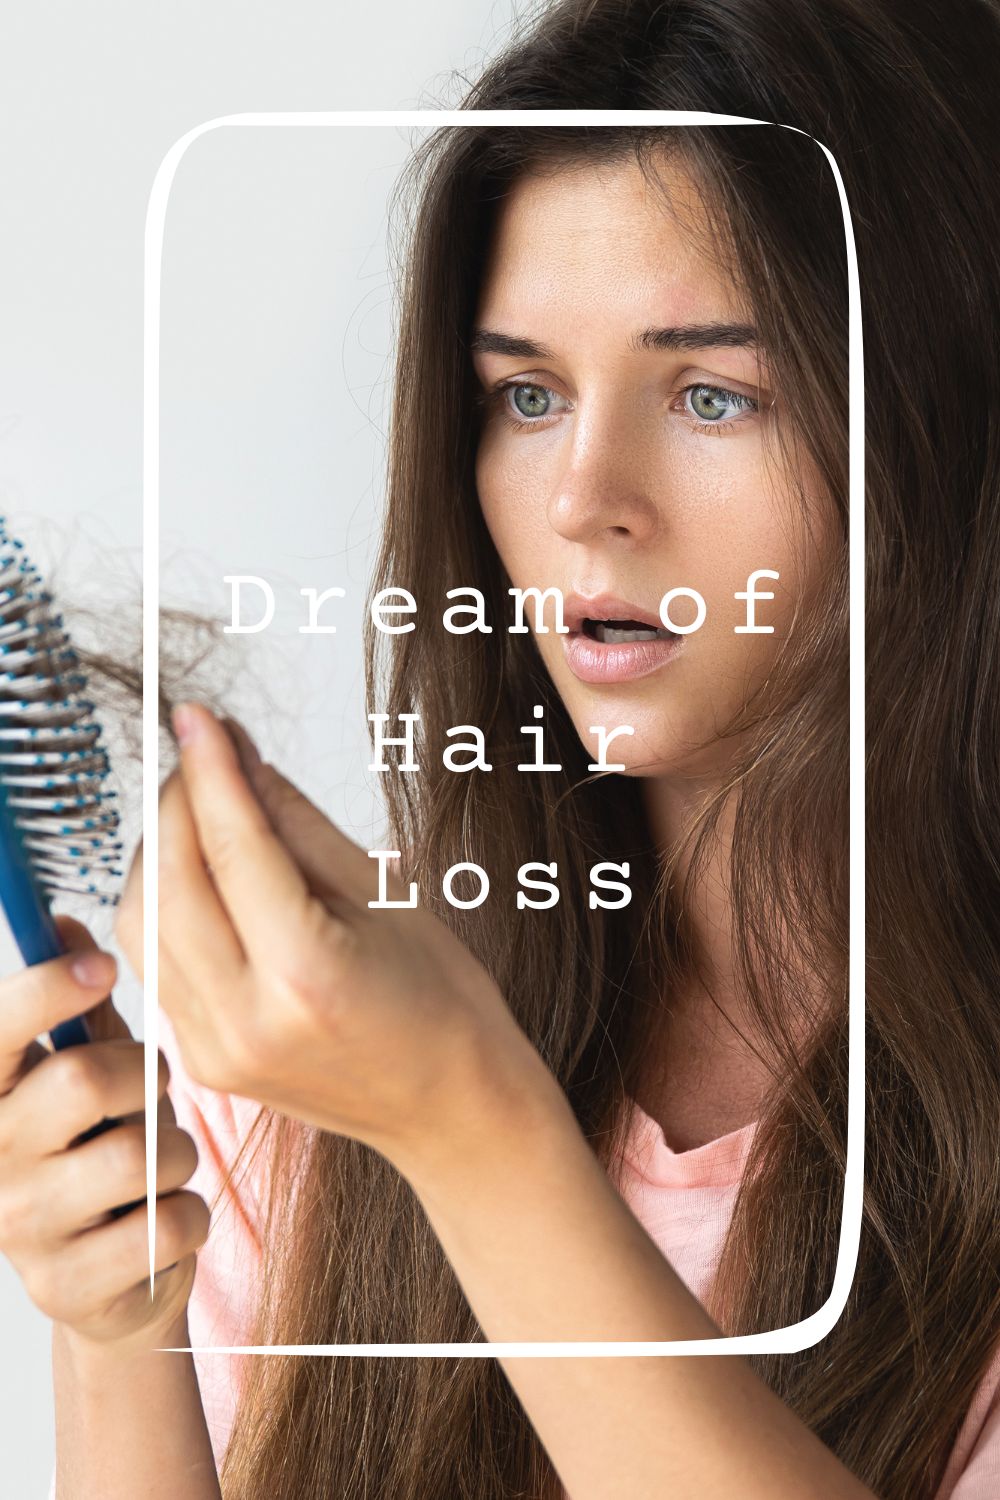 12 Dream of Hair Loss Meanings1